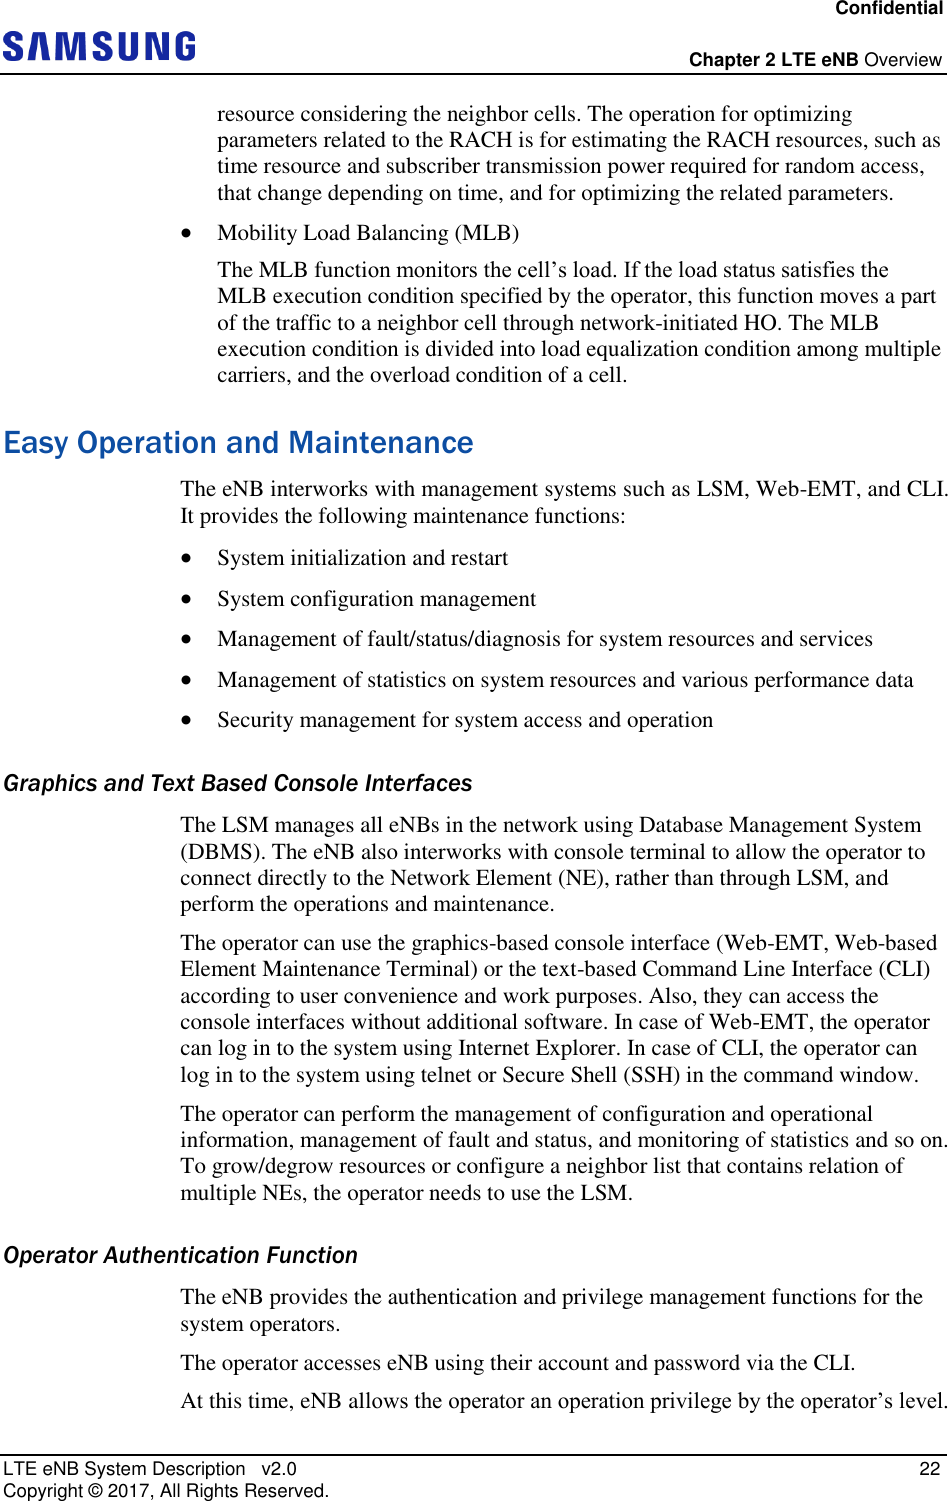 Confidential  Chapter 2 LTE eNB Overview LTE eNB System Description   v2.0   22 Copyright ©  2017, All Rights Reserved. resource considering the neighbor cells. The operation for optimizing parameters related to the RACH is for estimating the RACH resources, such as time resource and subscriber transmission power required for random access, that change depending on time, and for optimizing the related parameters.  Mobility Load Balancing (MLB) The MLB function monitors the cell’s load. If the load status satisfies the MLB execution condition specified by the operator, this function moves a part of the traffic to a neighbor cell through network-initiated HO. The MLB execution condition is divided into load equalization condition among multiple carriers, and the overload condition of a cell. Easy Operation and Maintenance The eNB interworks with management systems such as LSM, Web-EMT, and CLI. It provides the following maintenance functions:  System initialization and restart  System configuration management  Management of fault/status/diagnosis for system resources and services  Management of statistics on system resources and various performance data  Security management for system access and operation Graphics and Text Based Console Interfaces The LSM manages all eNBs in the network using Database Management System (DBMS). The eNB also interworks with console terminal to allow the operator to connect directly to the Network Element (NE), rather than through LSM, and perform the operations and maintenance. The operator can use the graphics-based console interface (Web-EMT, Web-based Element Maintenance Terminal) or the text-based Command Line Interface (CLI) according to user convenience and work purposes. Also, they can access the console interfaces without additional software. In case of Web-EMT, the operator can log in to the system using Internet Explorer. In case of CLI, the operator can log in to the system using telnet or Secure Shell (SSH) in the command window. The operator can perform the management of configuration and operational information, management of fault and status, and monitoring of statistics and so on. To grow/degrow resources or configure a neighbor list that contains relation of multiple NEs, the operator needs to use the LSM. Operator Authentication Function The eNB provides the authentication and privilege management functions for the system operators. The operator accesses eNB using their account and password via the CLI. At this time, eNB allows the operator an operation privilege by the operator’s level. 